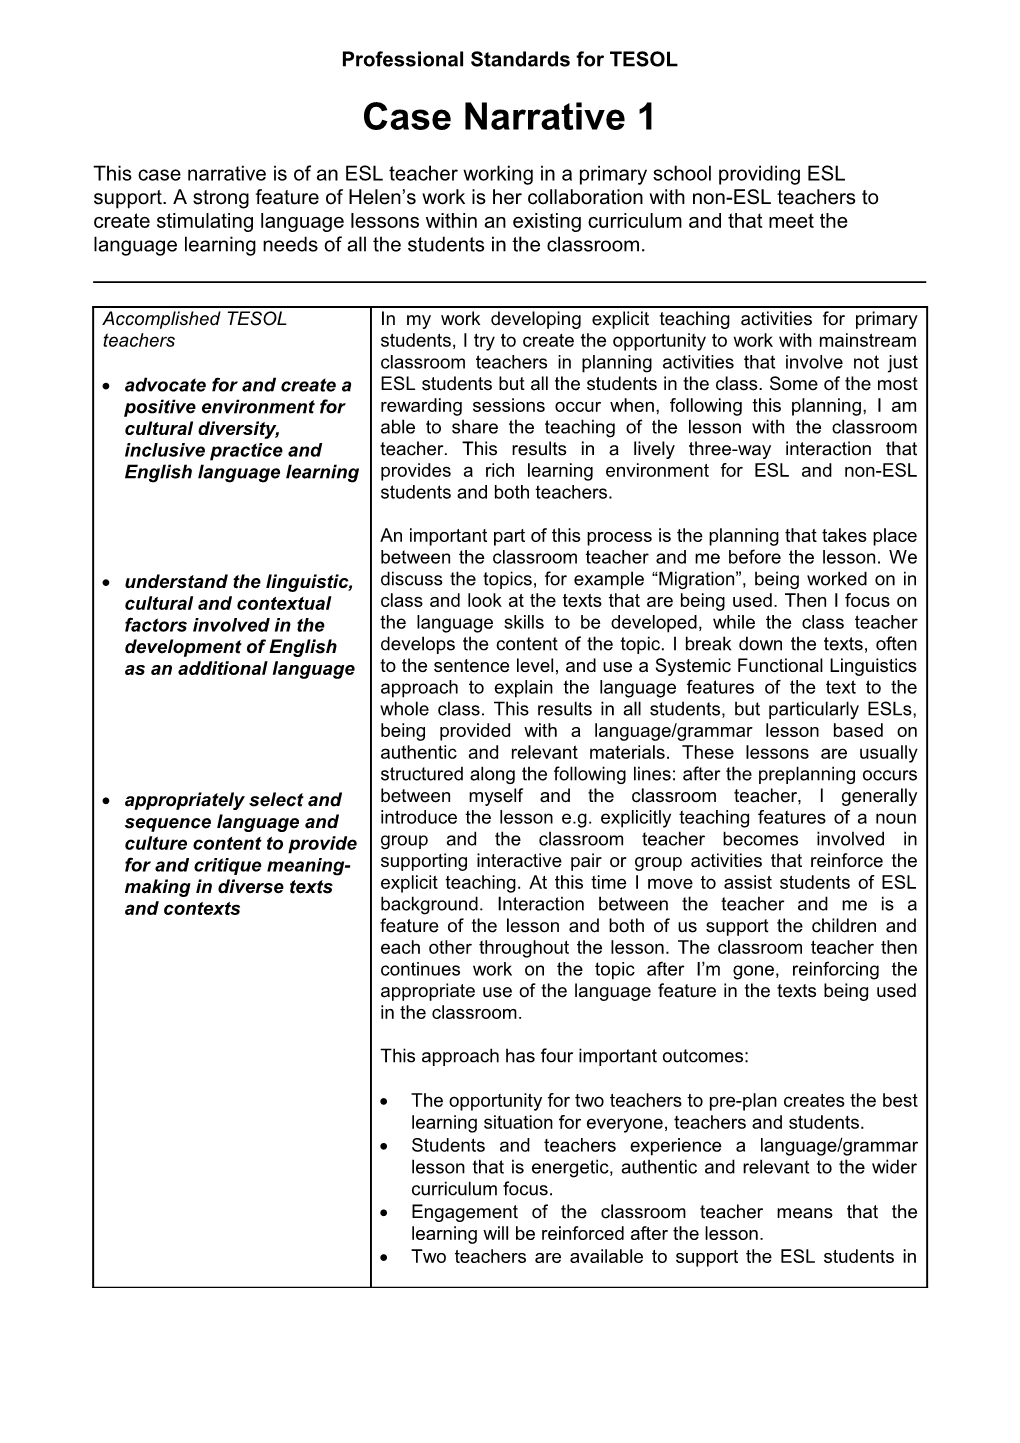 Professional Standards for TESOL